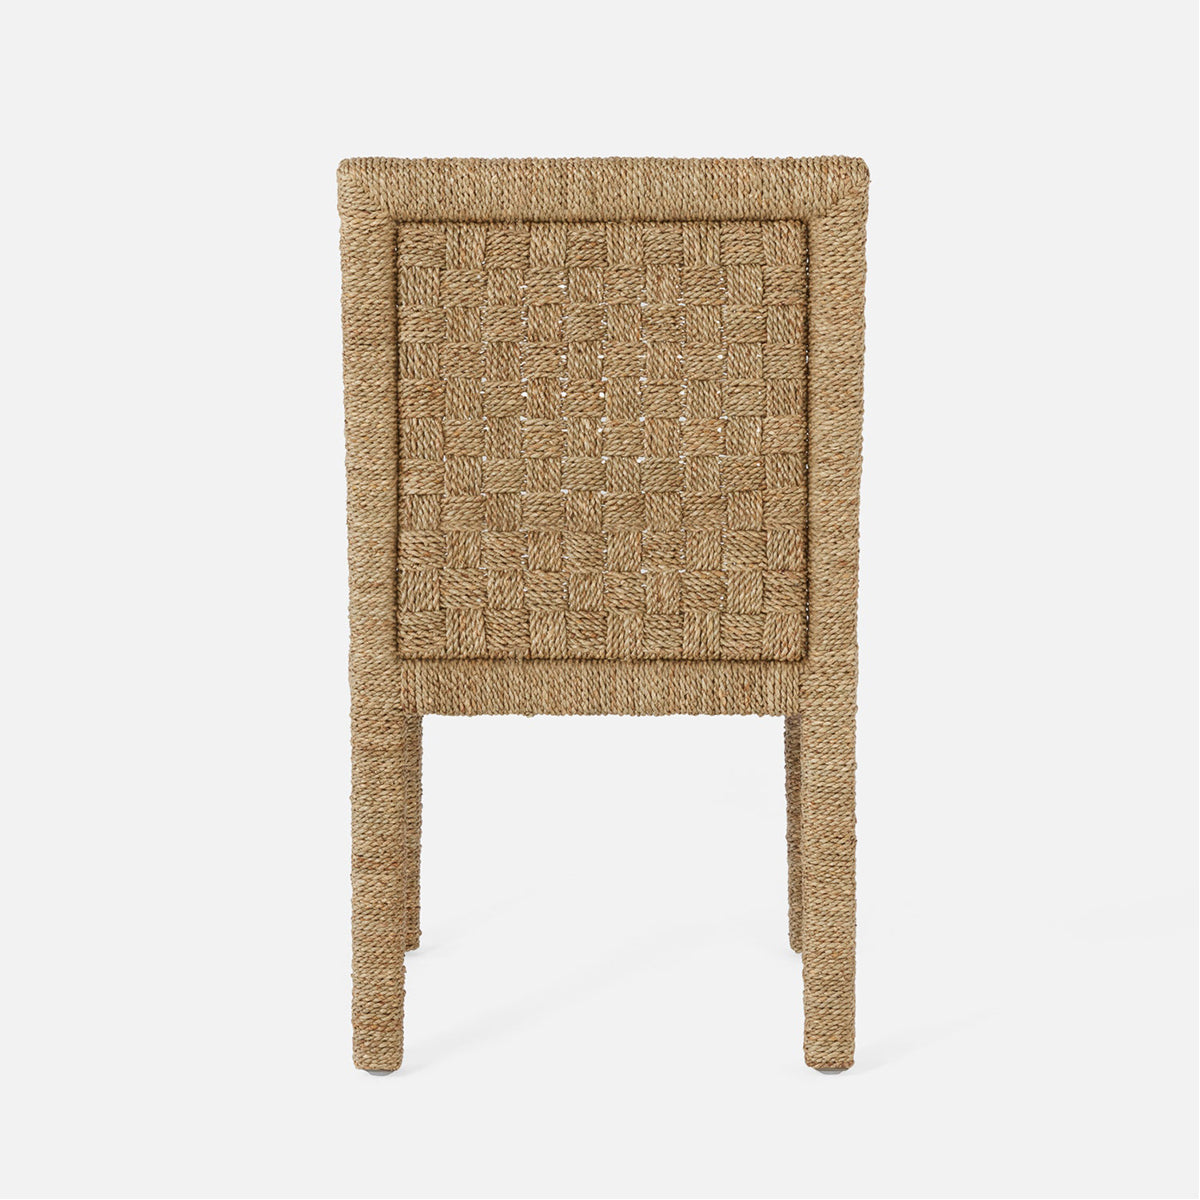 Made Goods Hayes Dining Chair in Kern Fabric